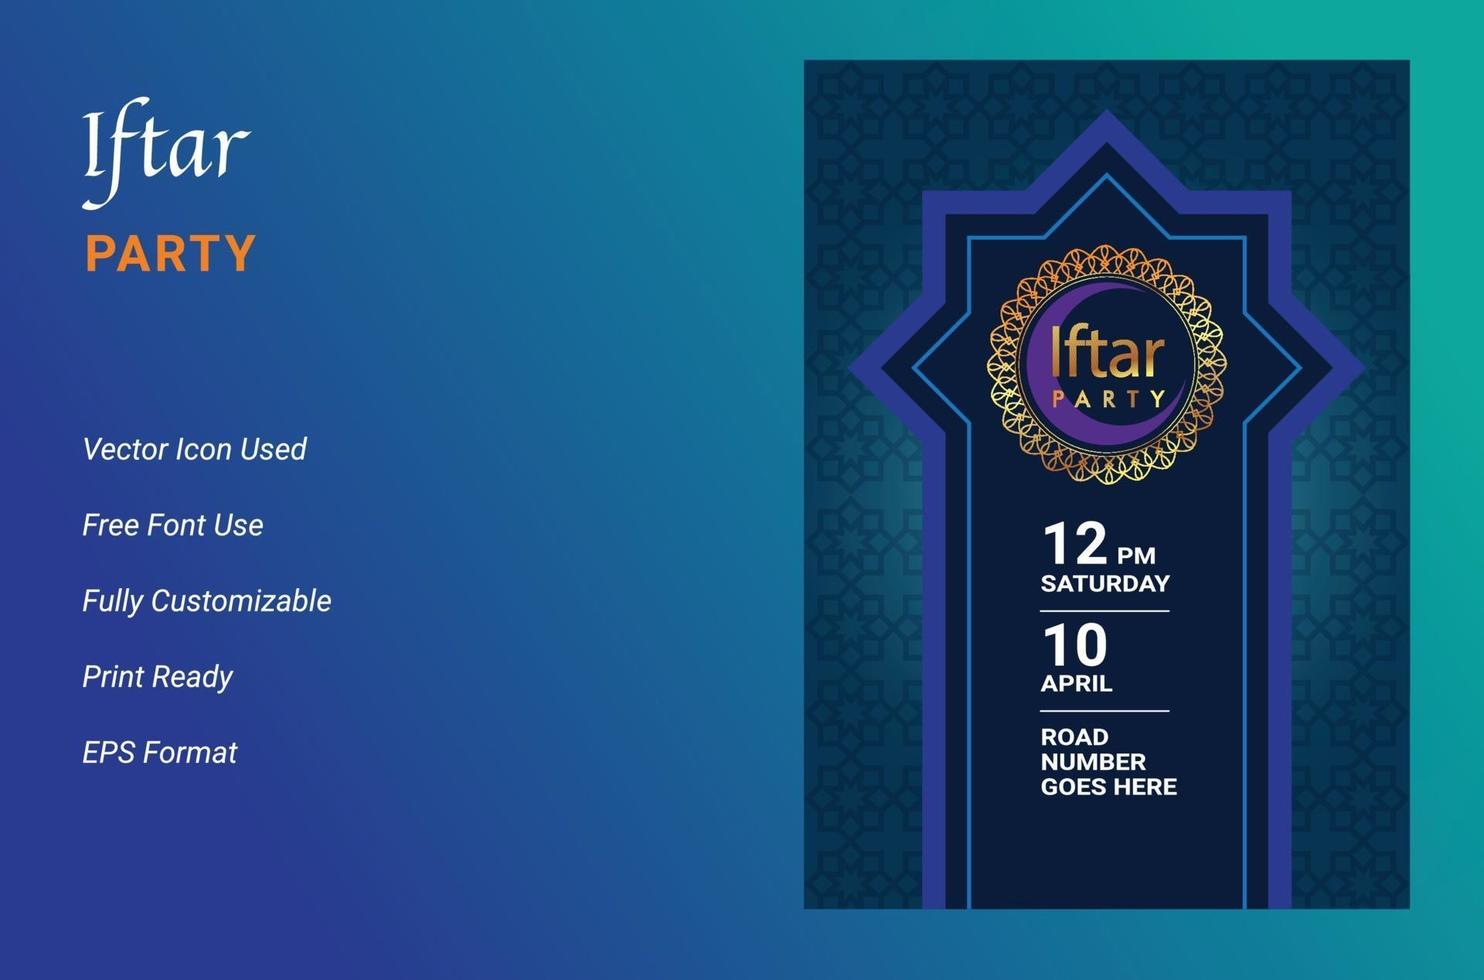 Ifter Party invitation flyer design. Ramadan flyer for ifter party vector